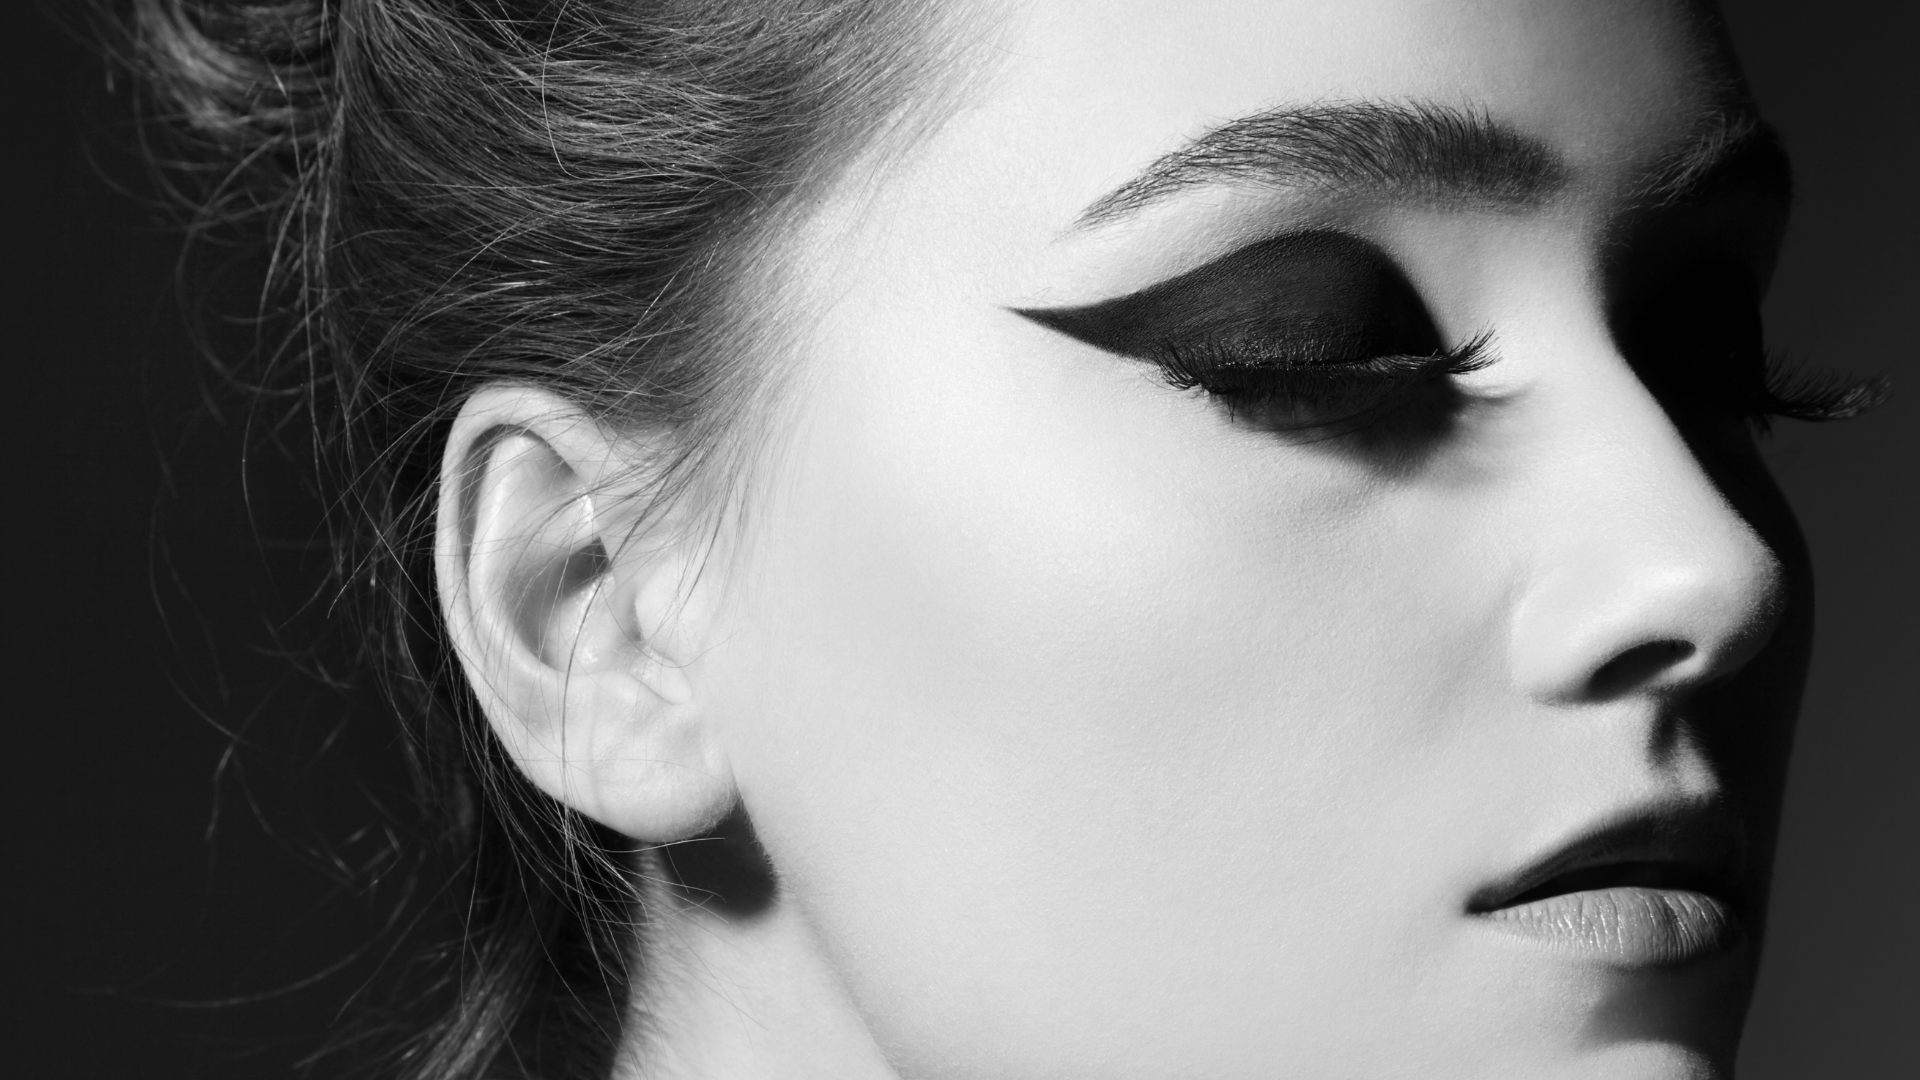 Overstated eyeliner/eyeshadow is going to be a trend in 2022